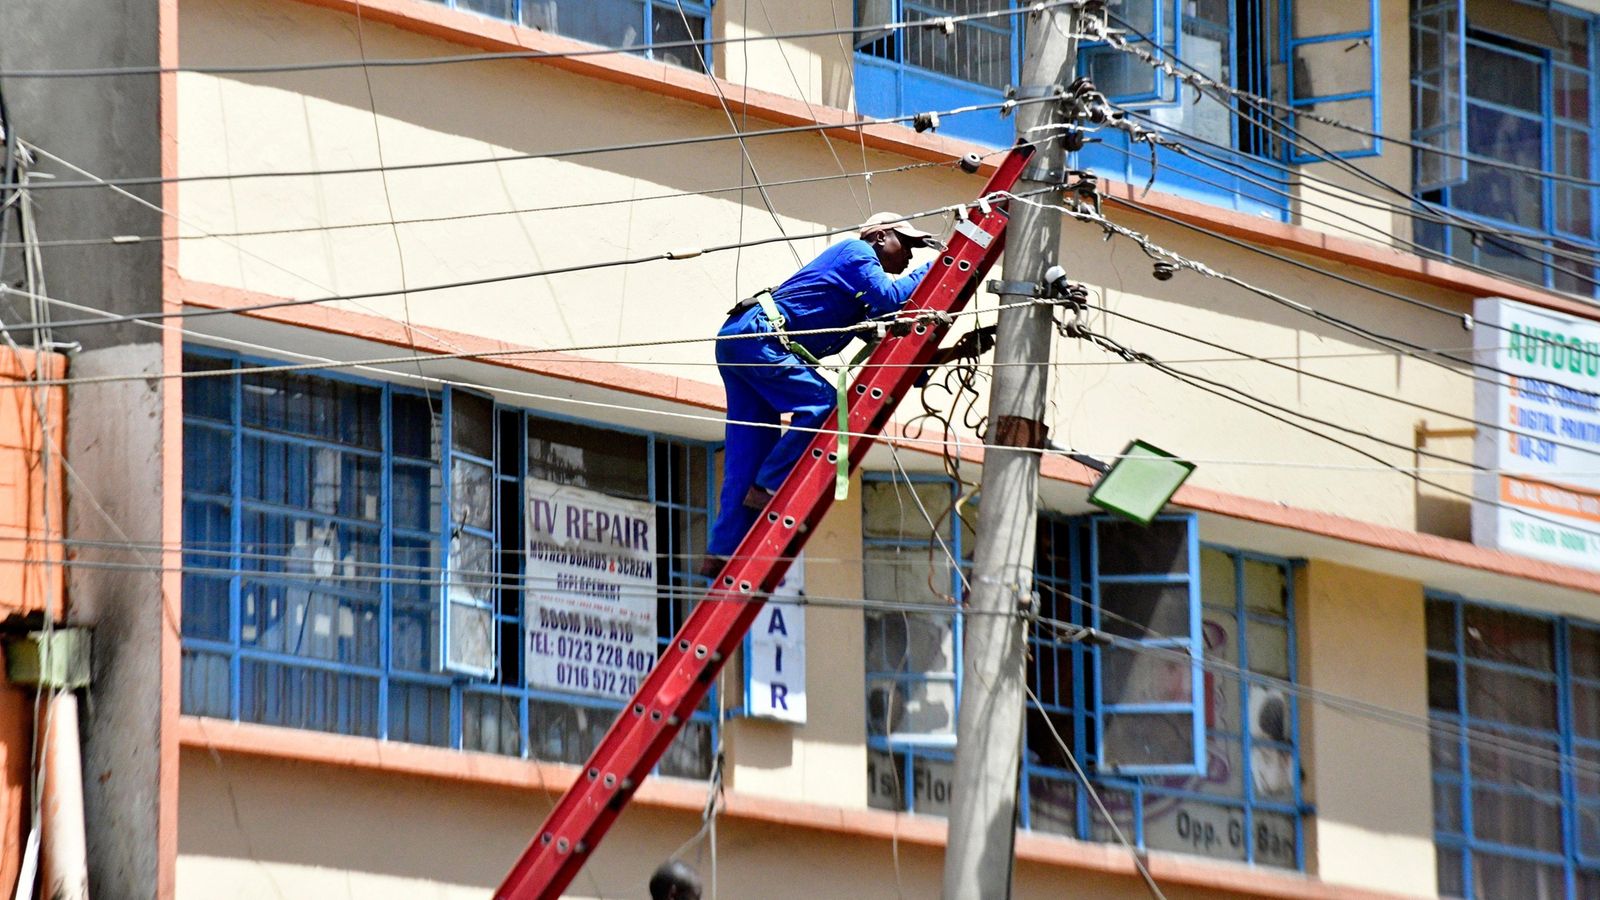 Own generation up 60pc as more firms dump Kenya Power